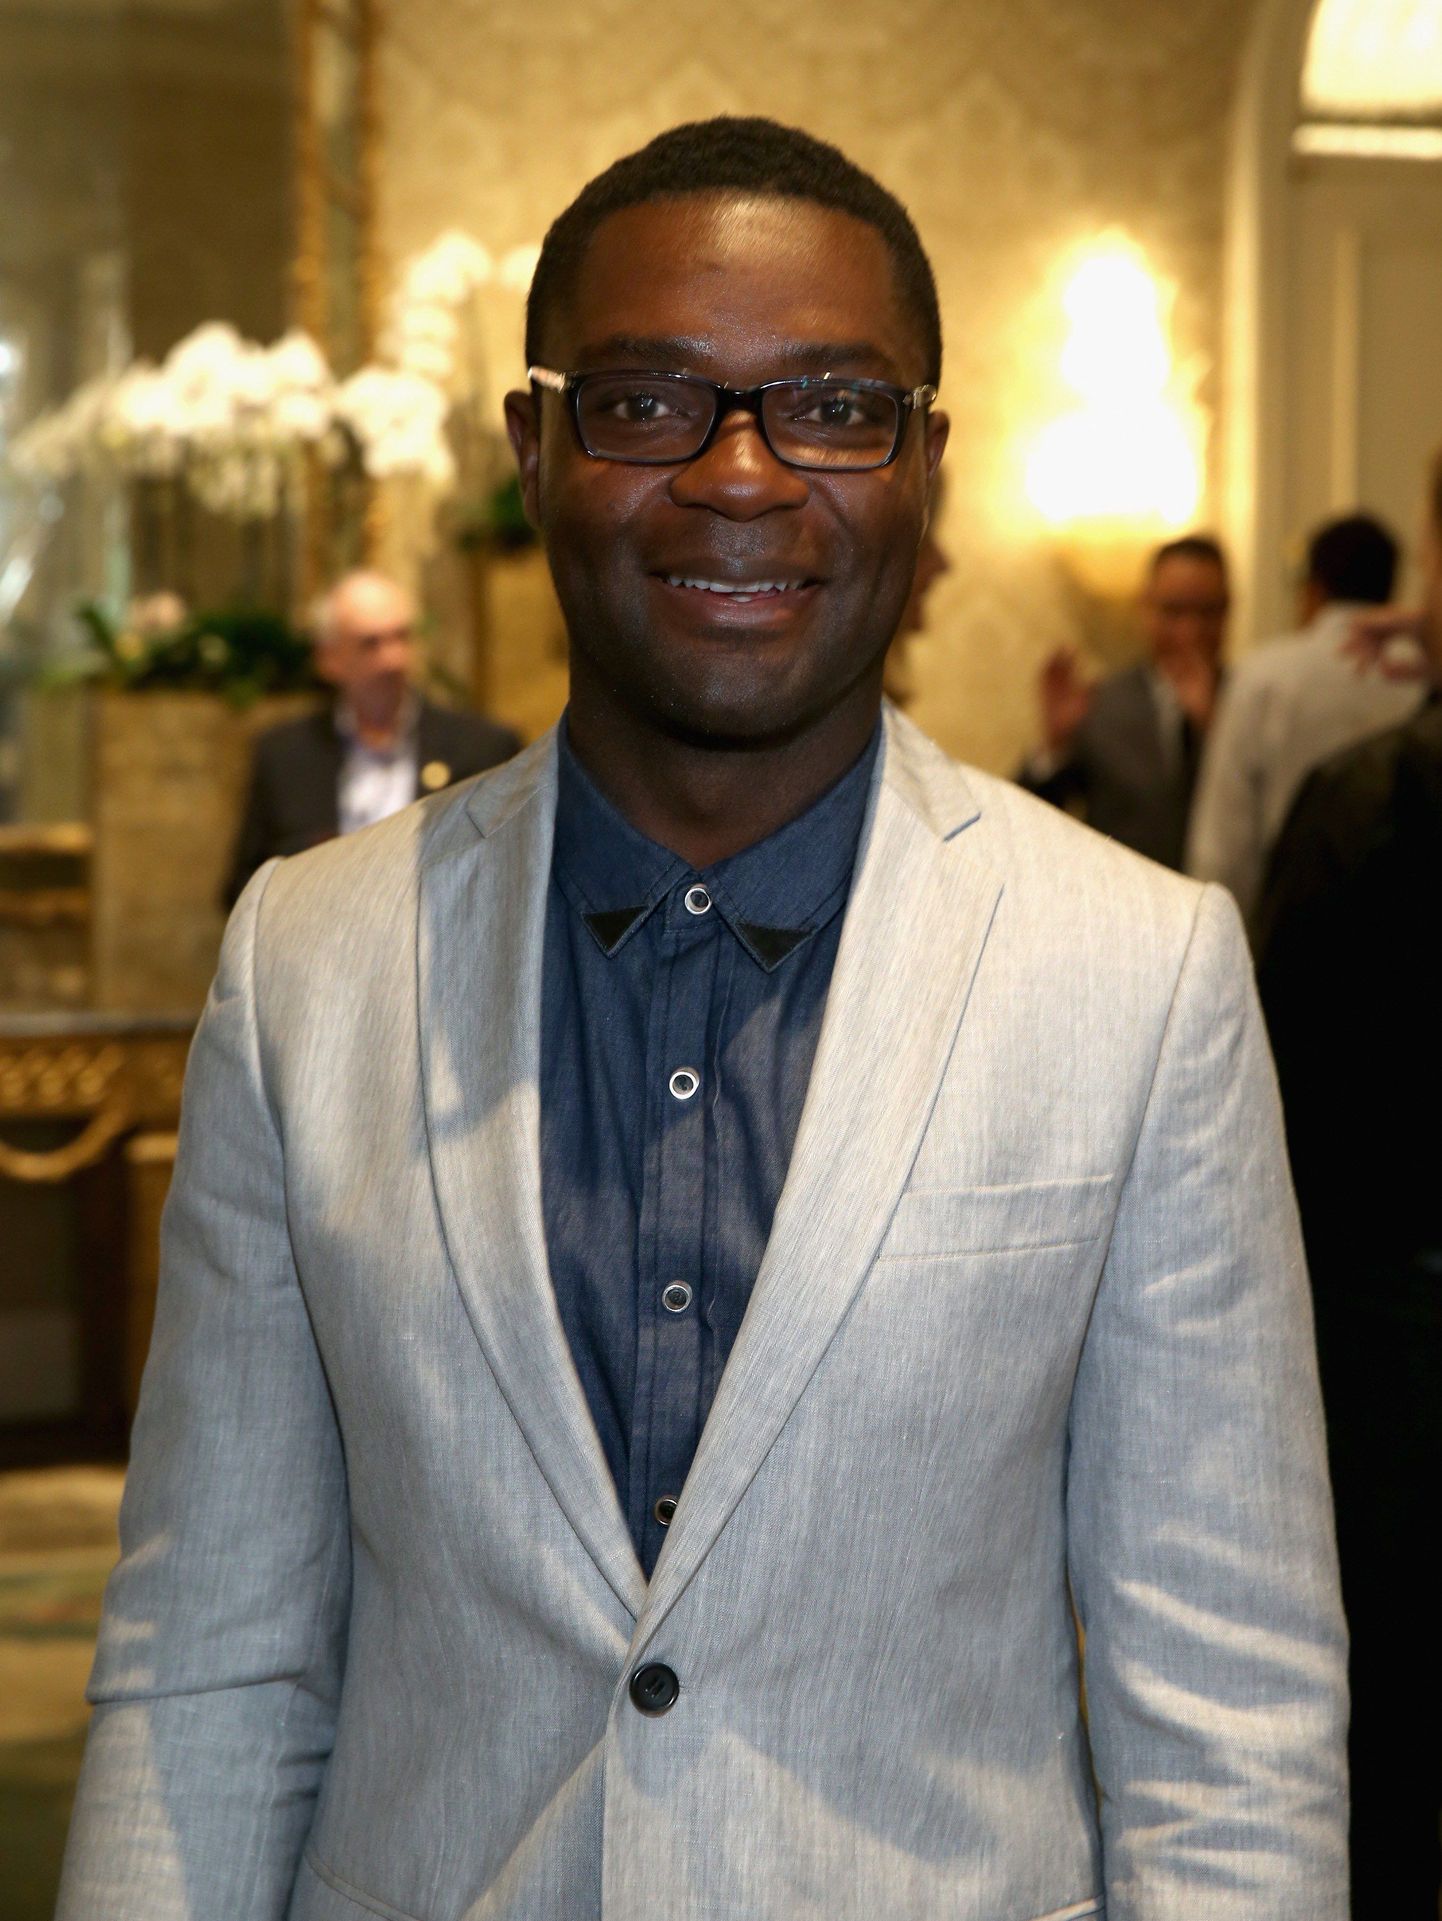 LOS ANGELES, CA - JUNE 25: Actor David Oyelowo attends The 2015 PURPOSE: The Family Entertainment & Faith-Based Summit presented by Variety on June 25, 2015 in Los Angeles, California.   Jonathan Leibson/Getty Images for Variety/AFP
== FOR NEWSPAPERS, INTERNET, TELCOS & TELEVISION USE ONLY ==